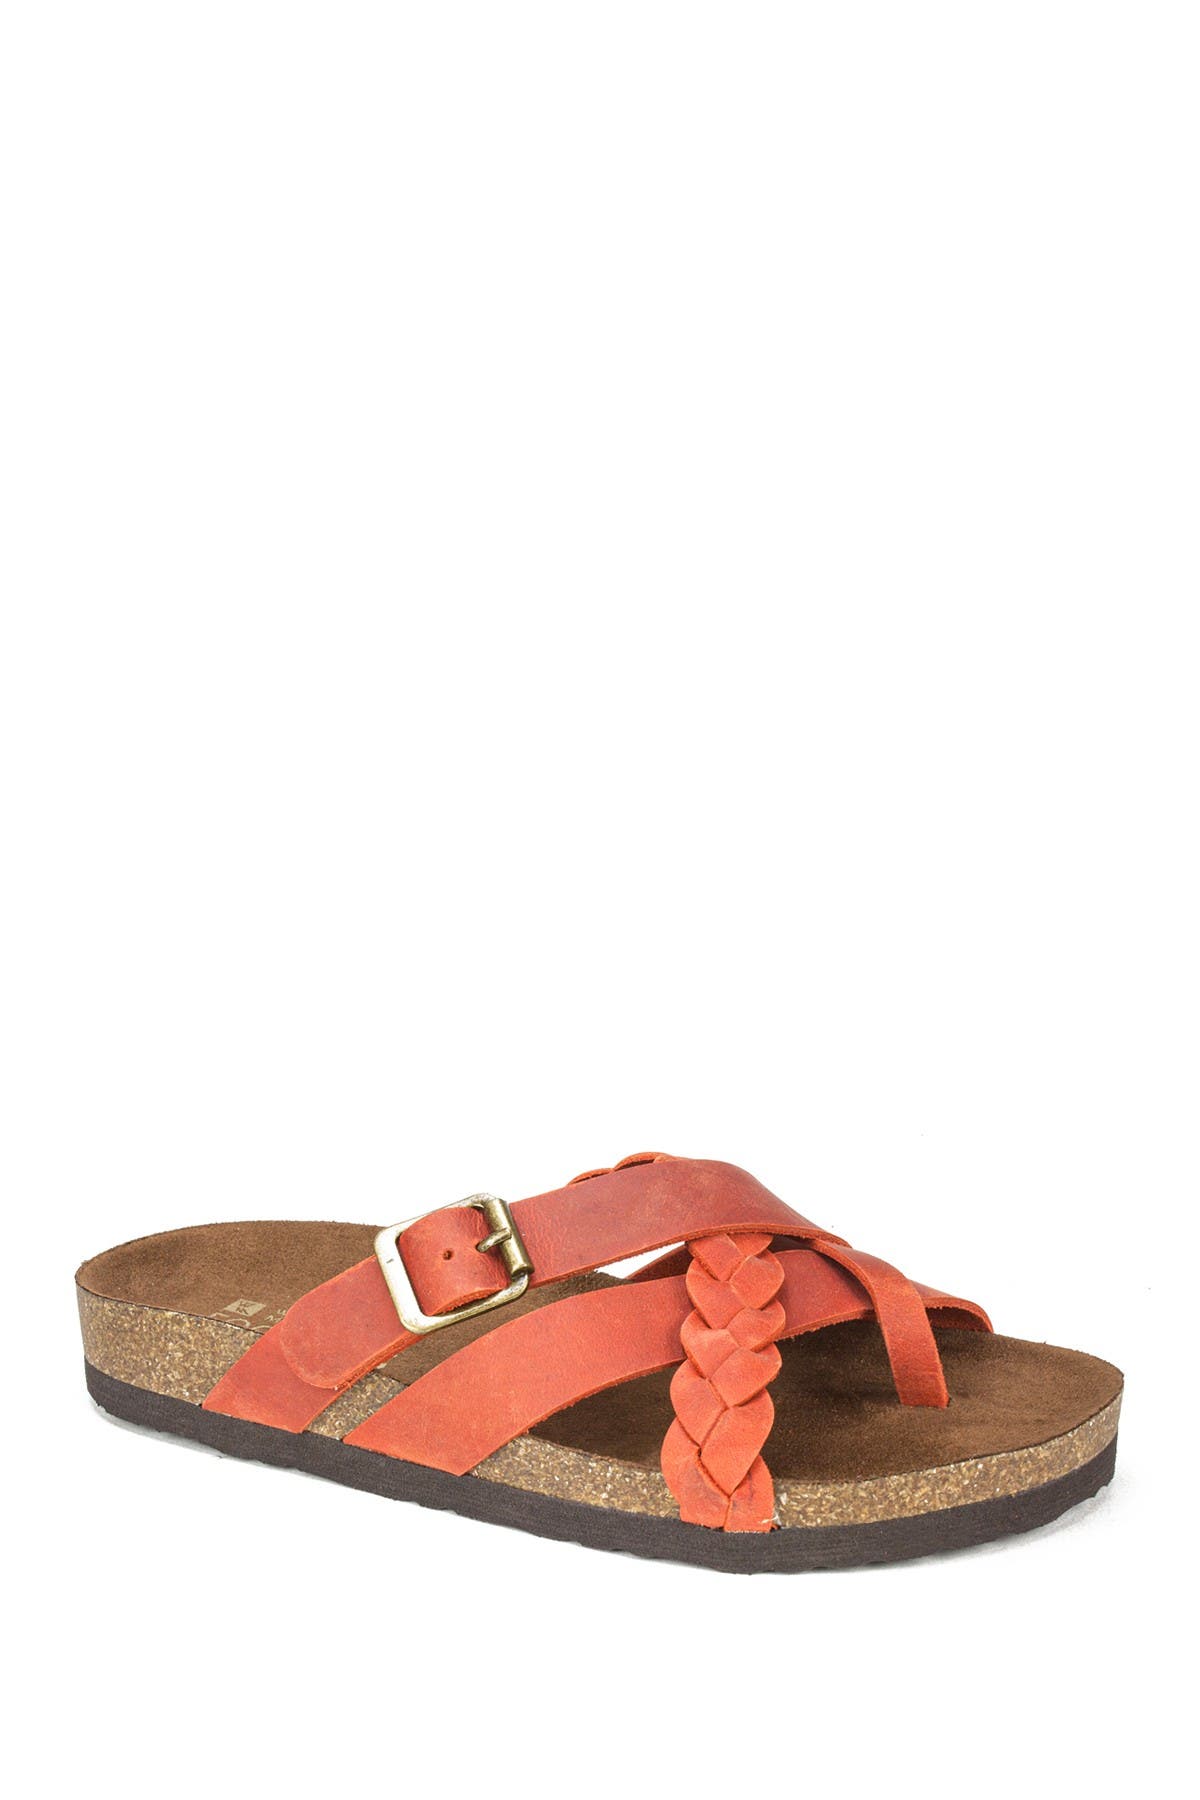 White Mountain Footwear Harrington Leather Footbed Sandal In Rust/leather